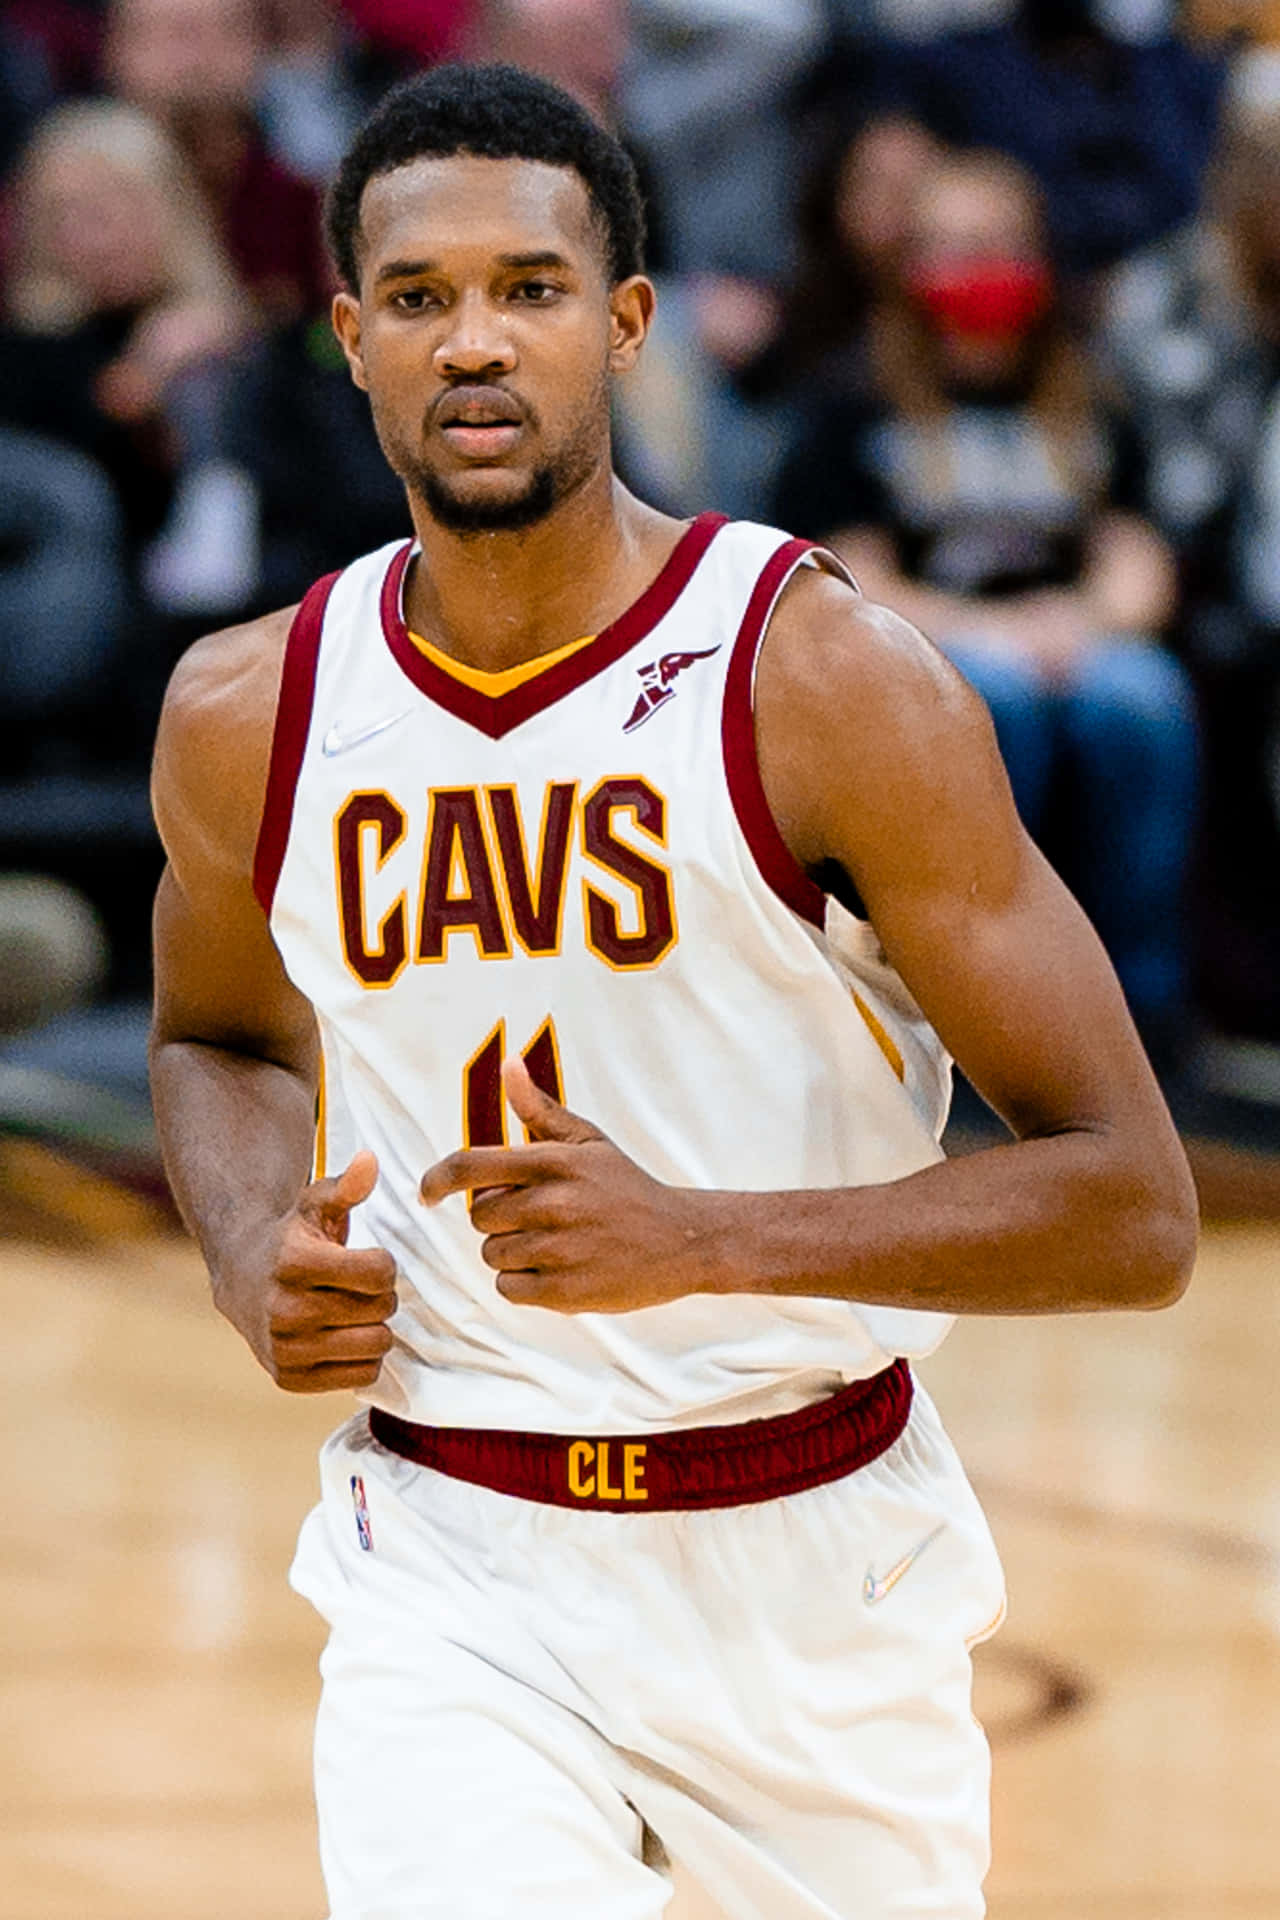 Cleveland Cavaliers Player In Action.jpg Wallpaper